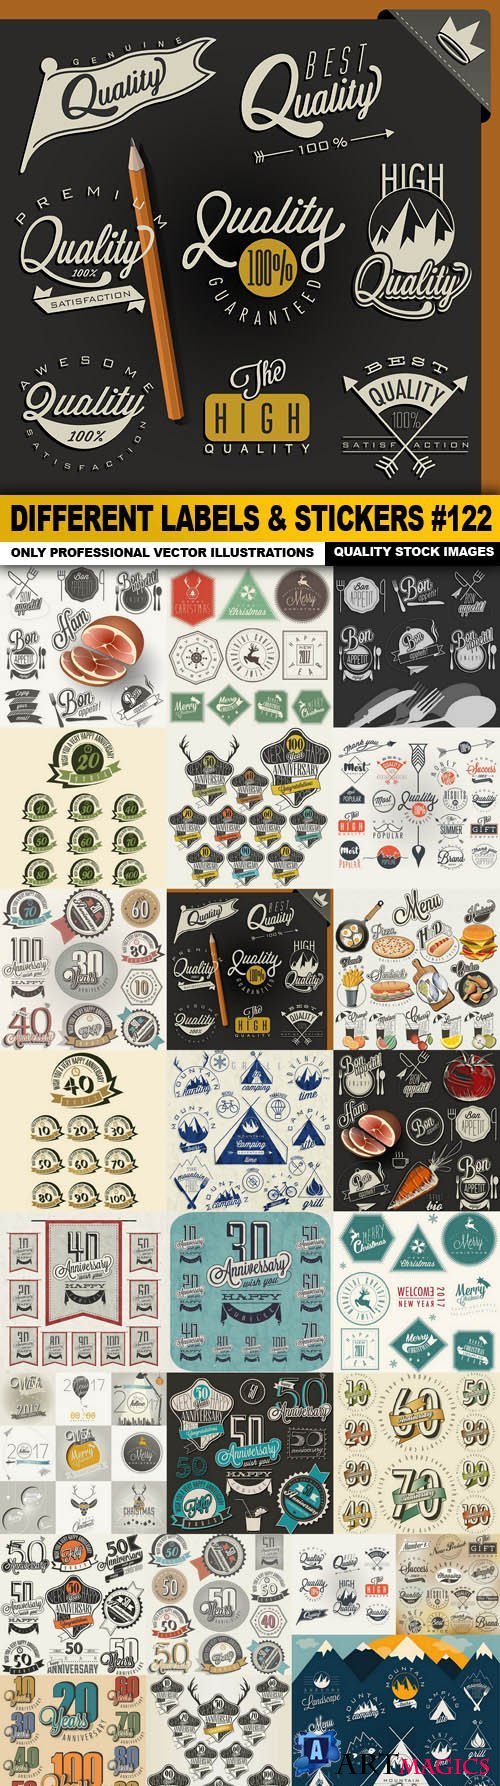 Different Labels & Stickers #122 - 25 Vector